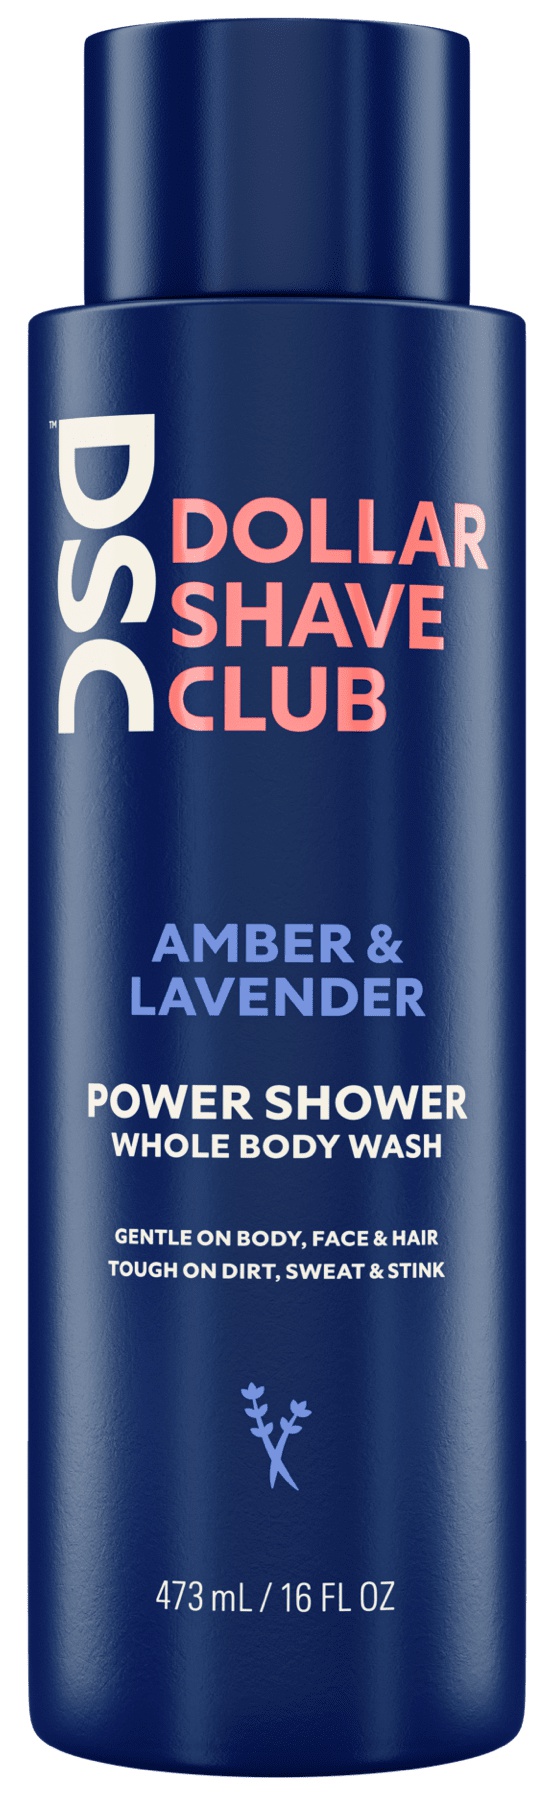 Dollar Shave Club Power Shower Whole Body Wash Amber And Lavender